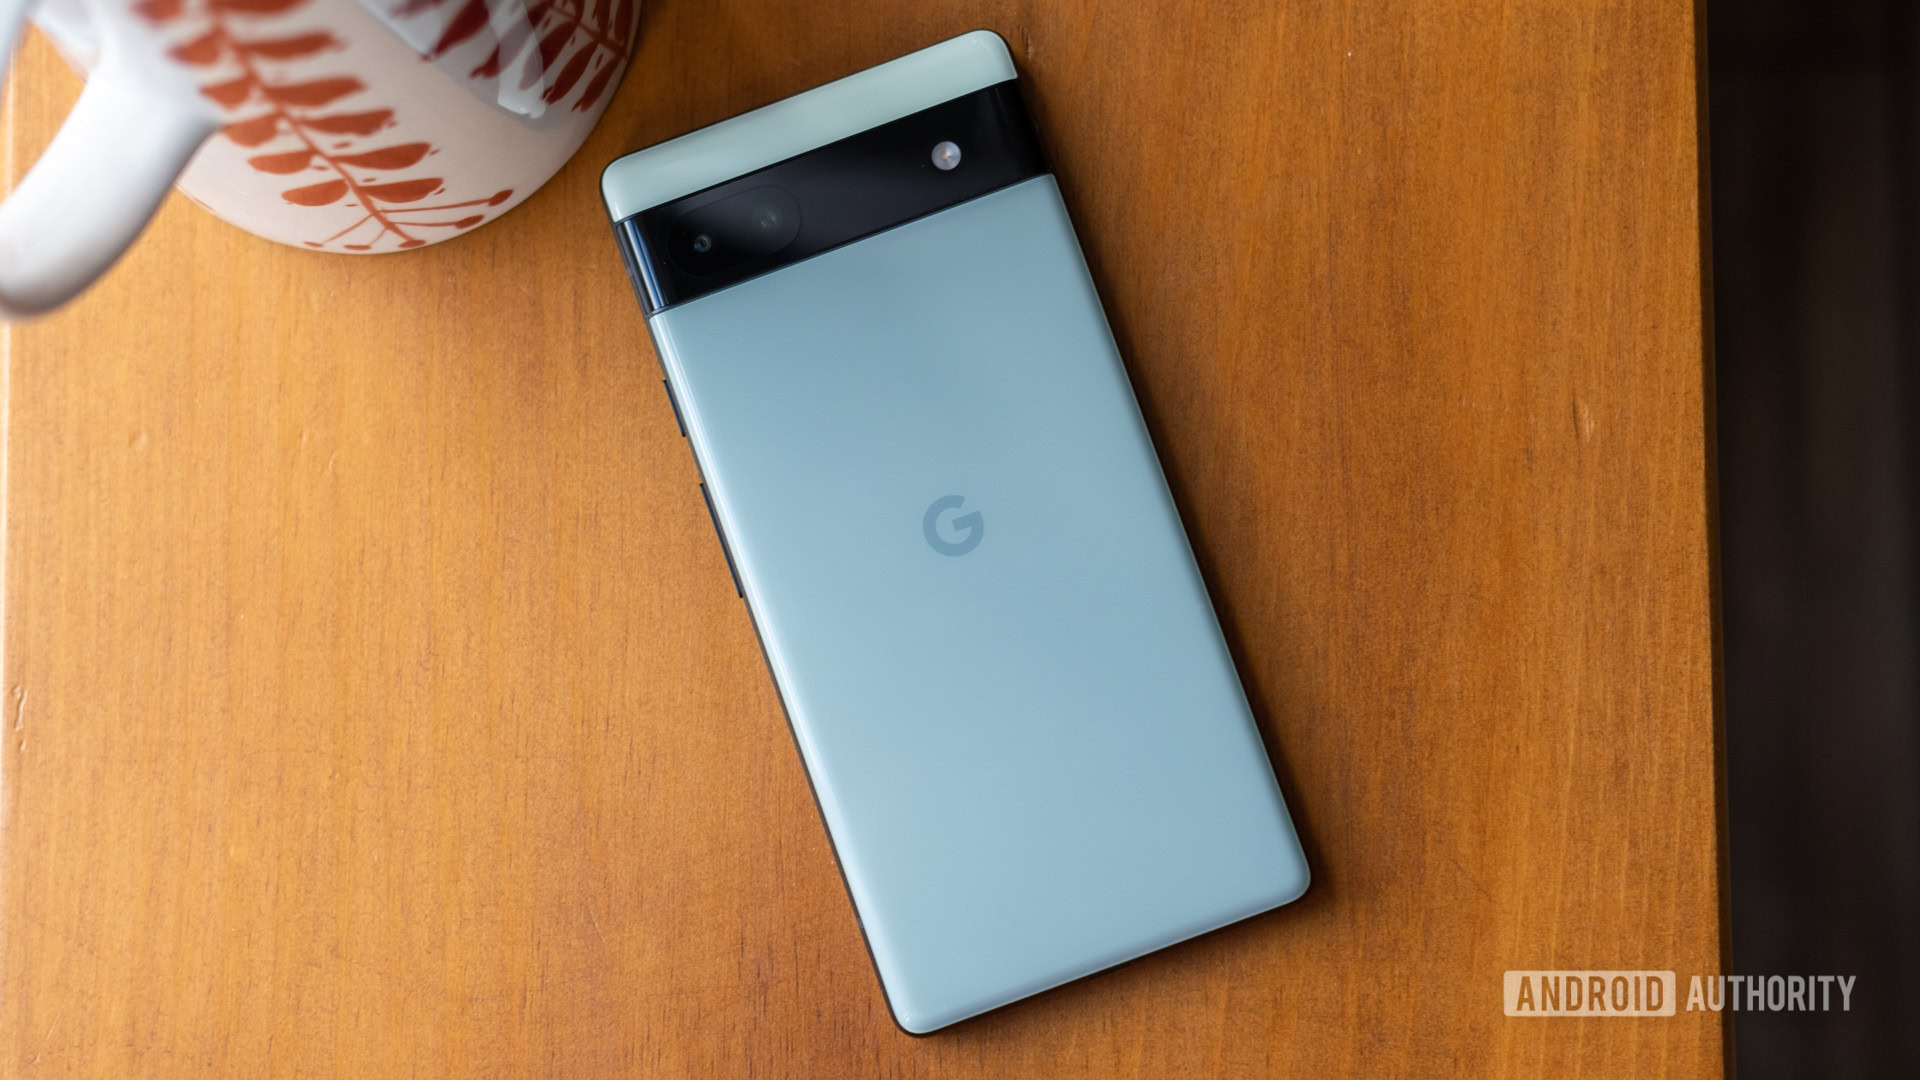 Google Pixel 6a Review: Unbeatable Value in a Budget Android Phone